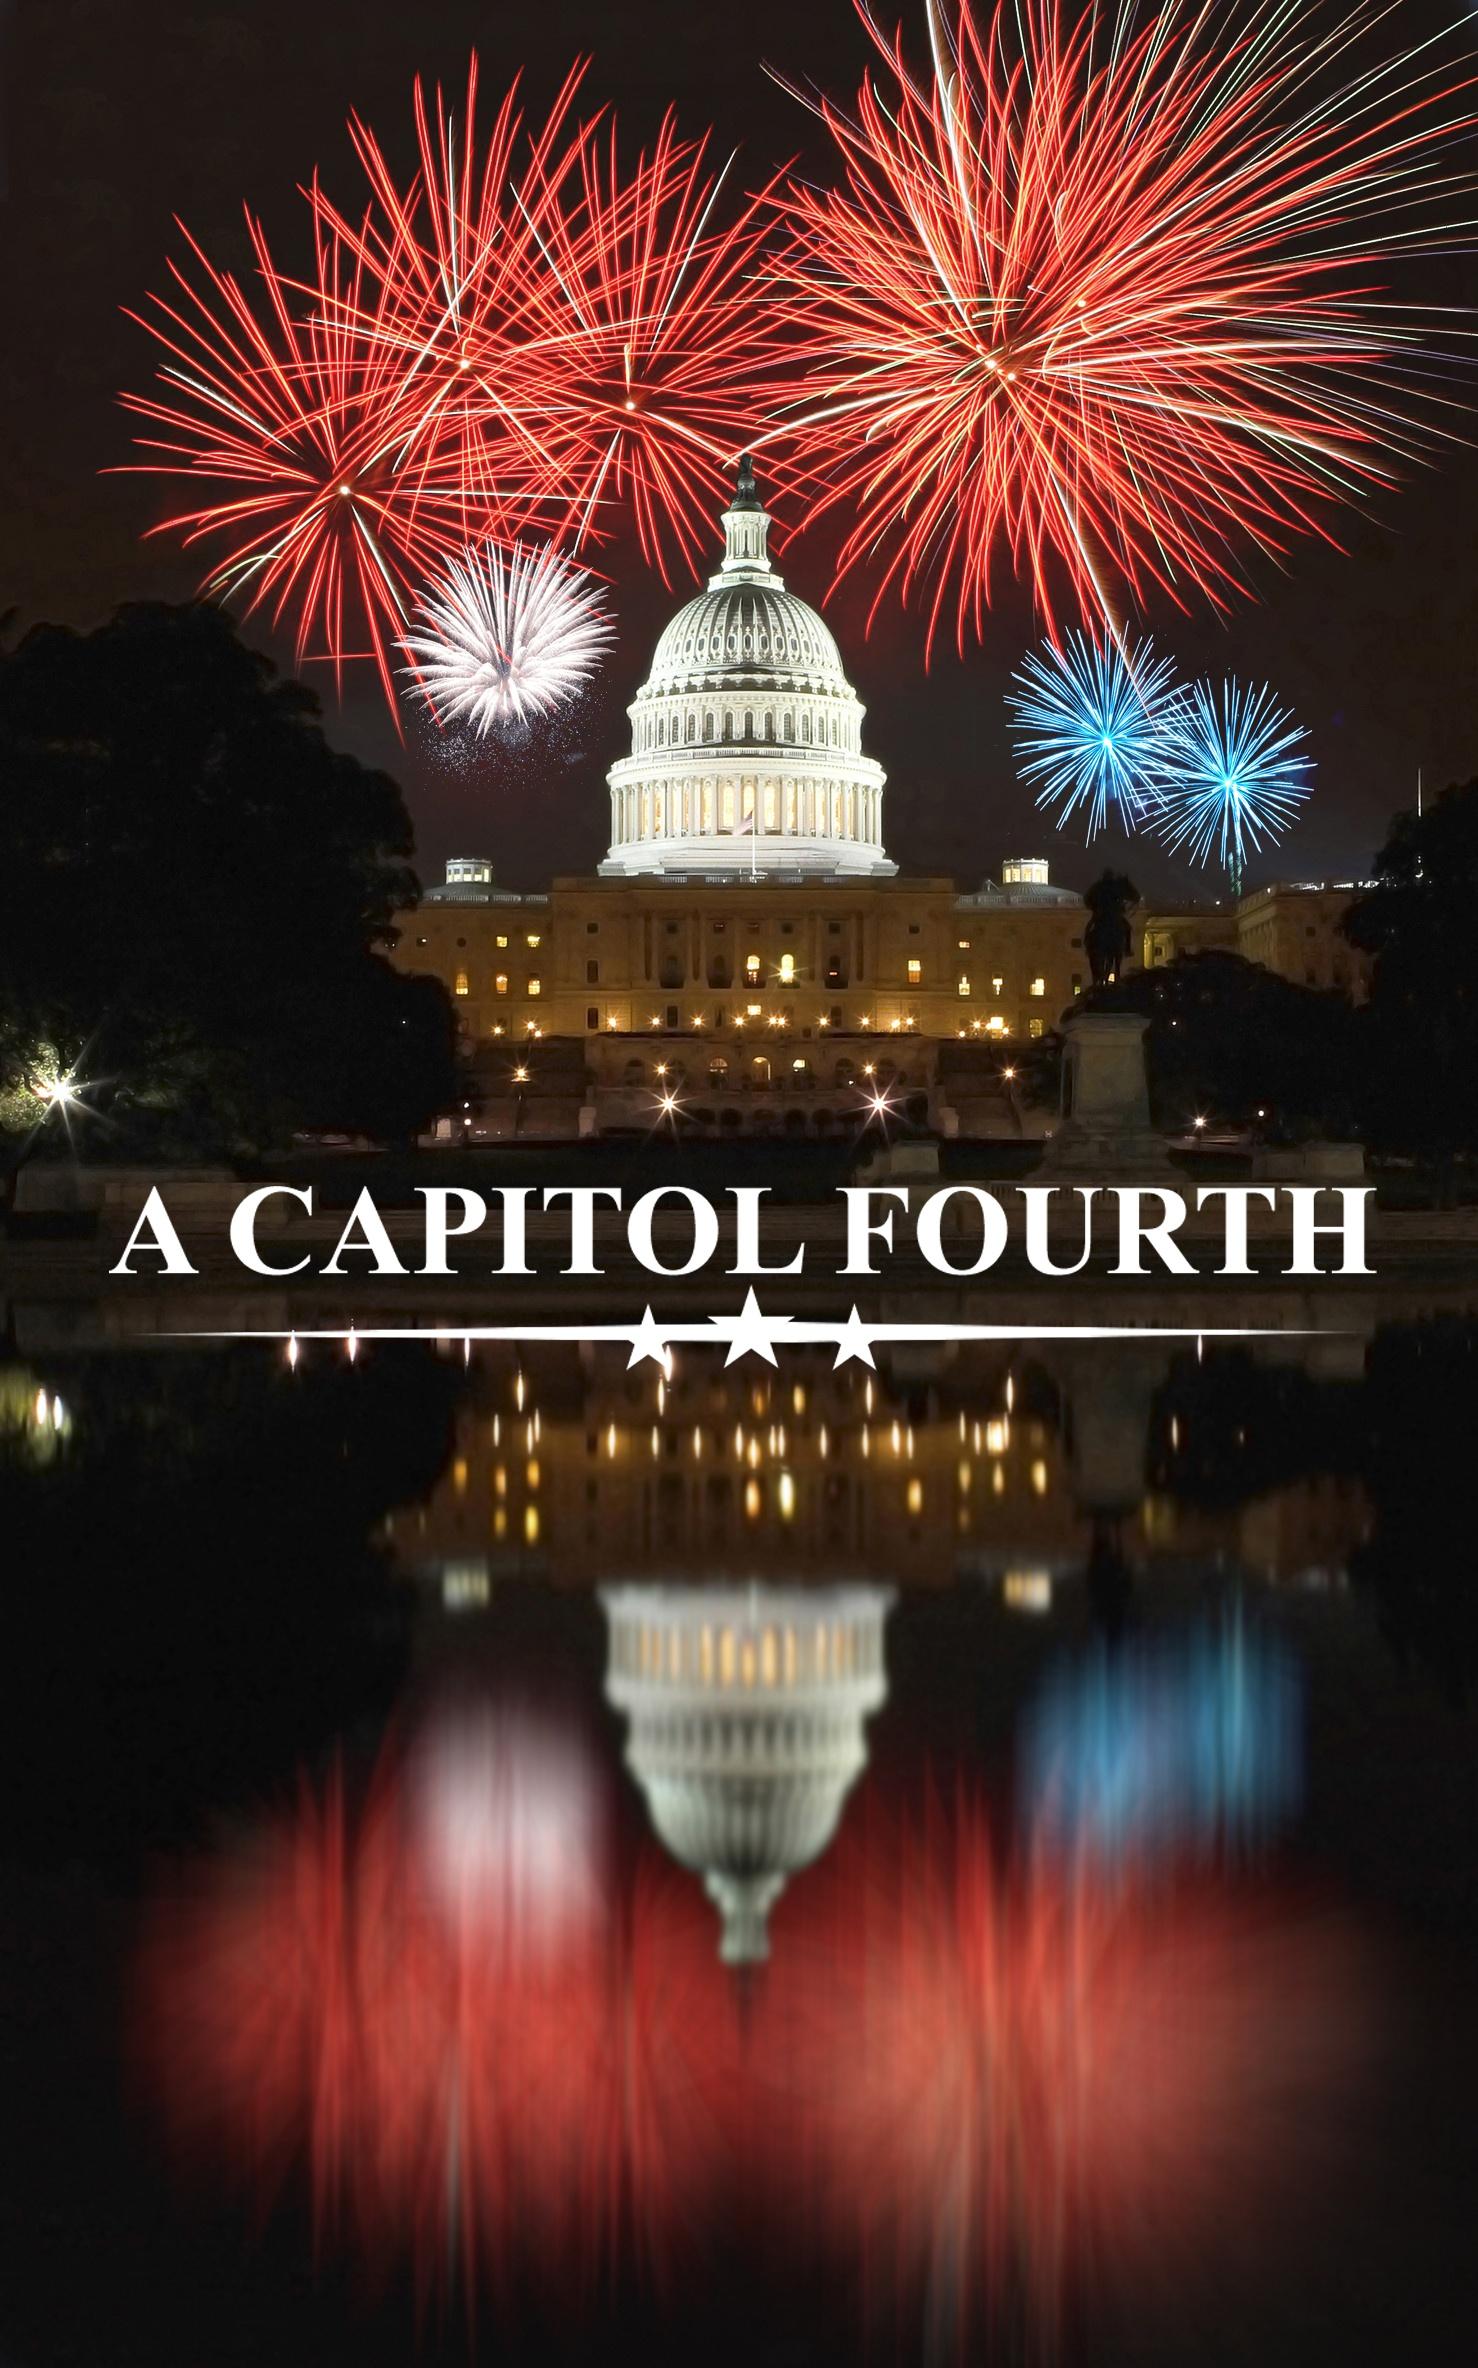 A Capitol Fourth Programs PBS SoCal